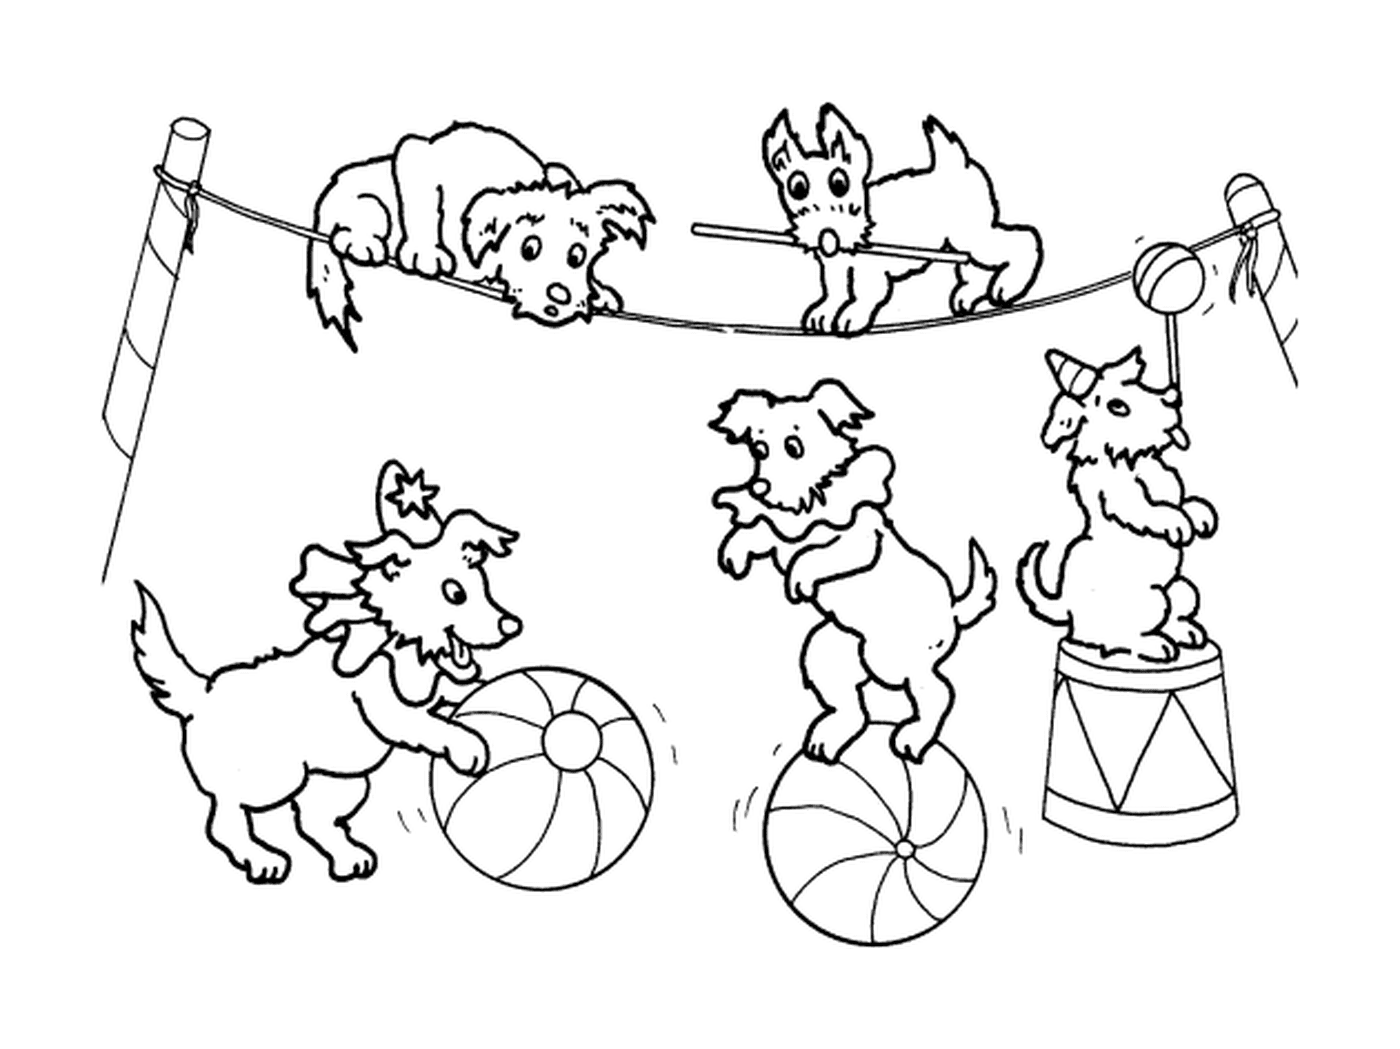  Balancing Dogs for the Circus 